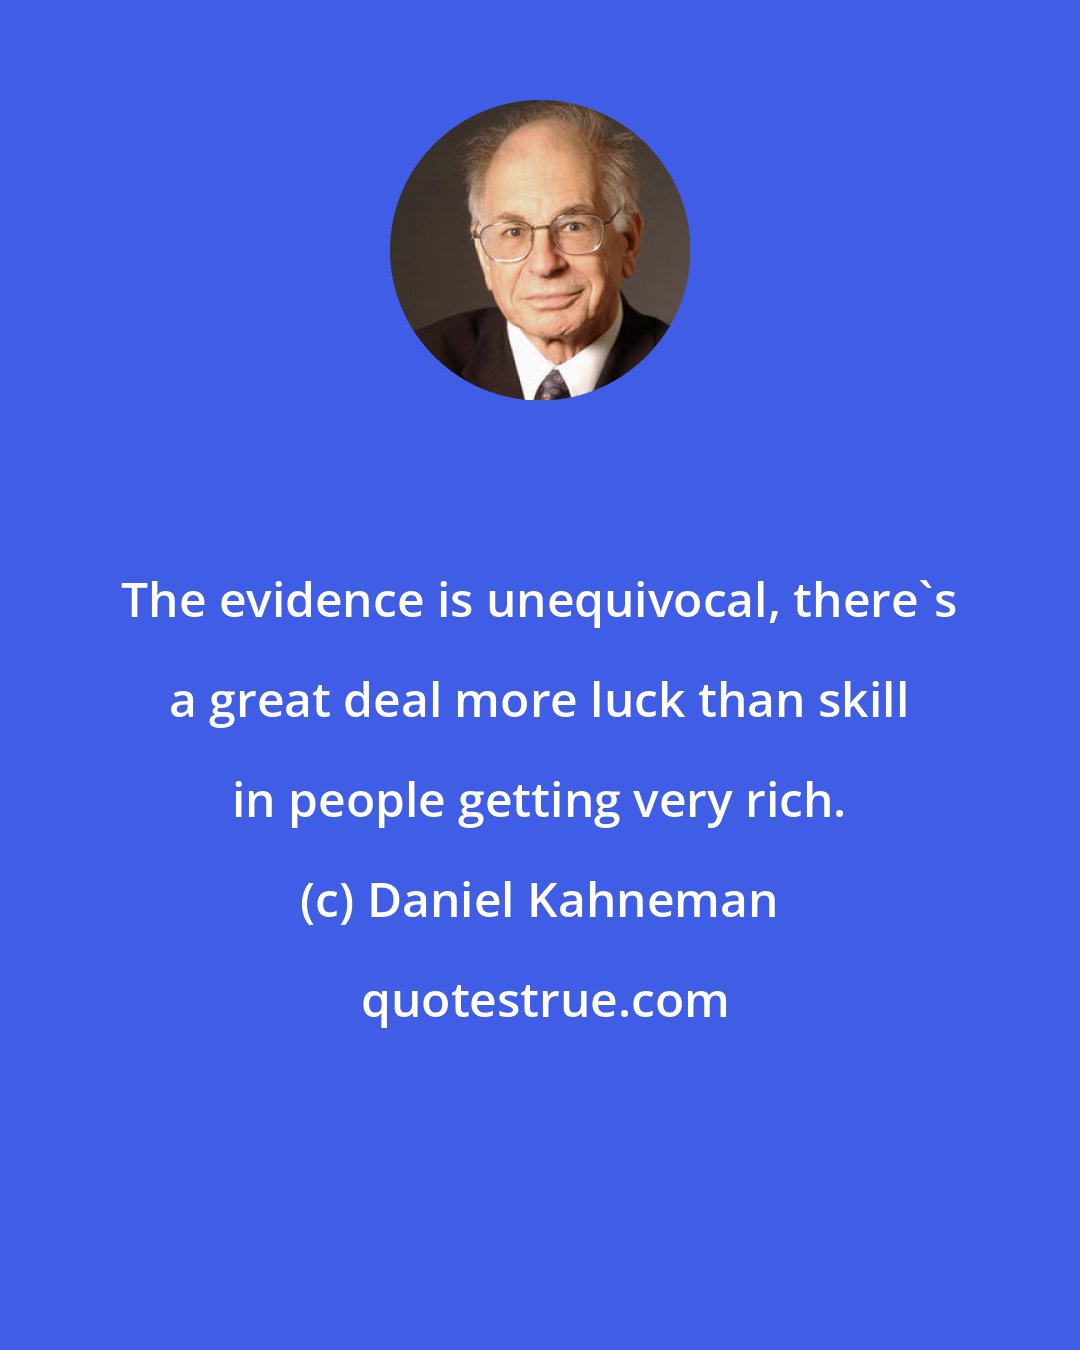 Daniel Kahneman: The evidence is unequivocal, there's a great deal more luck than skill in people getting very rich.